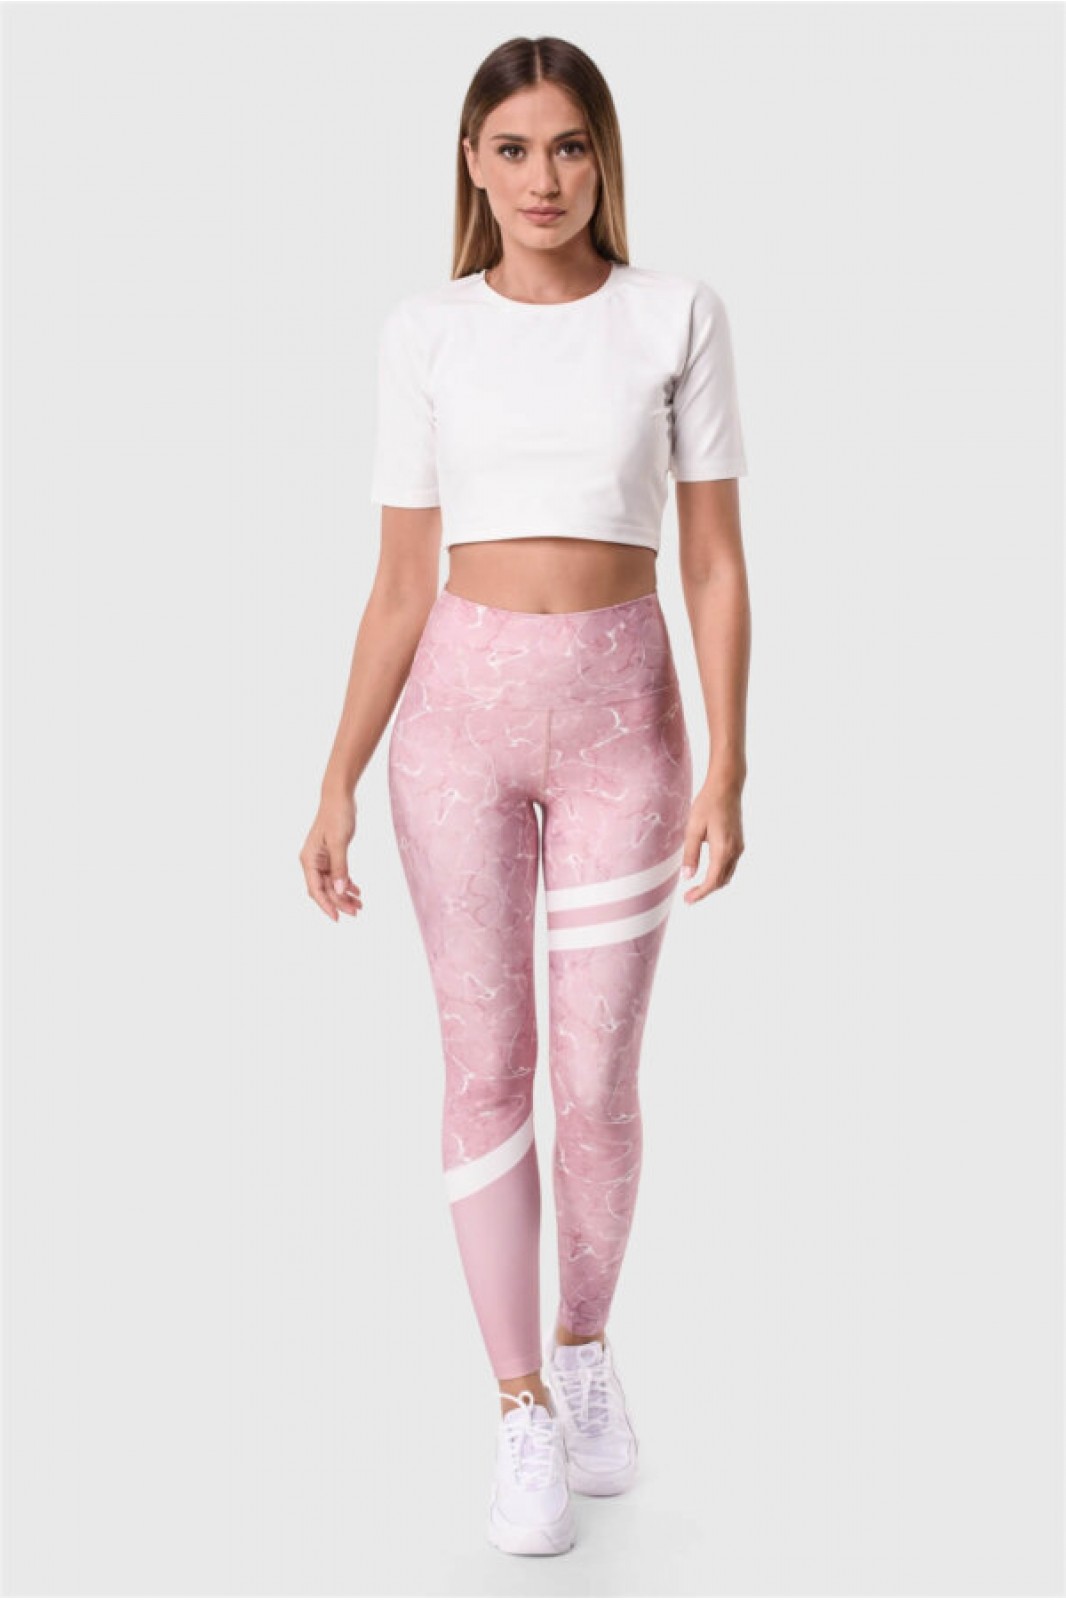 Sports leggings Superstacy Pink Marble PUSH UP